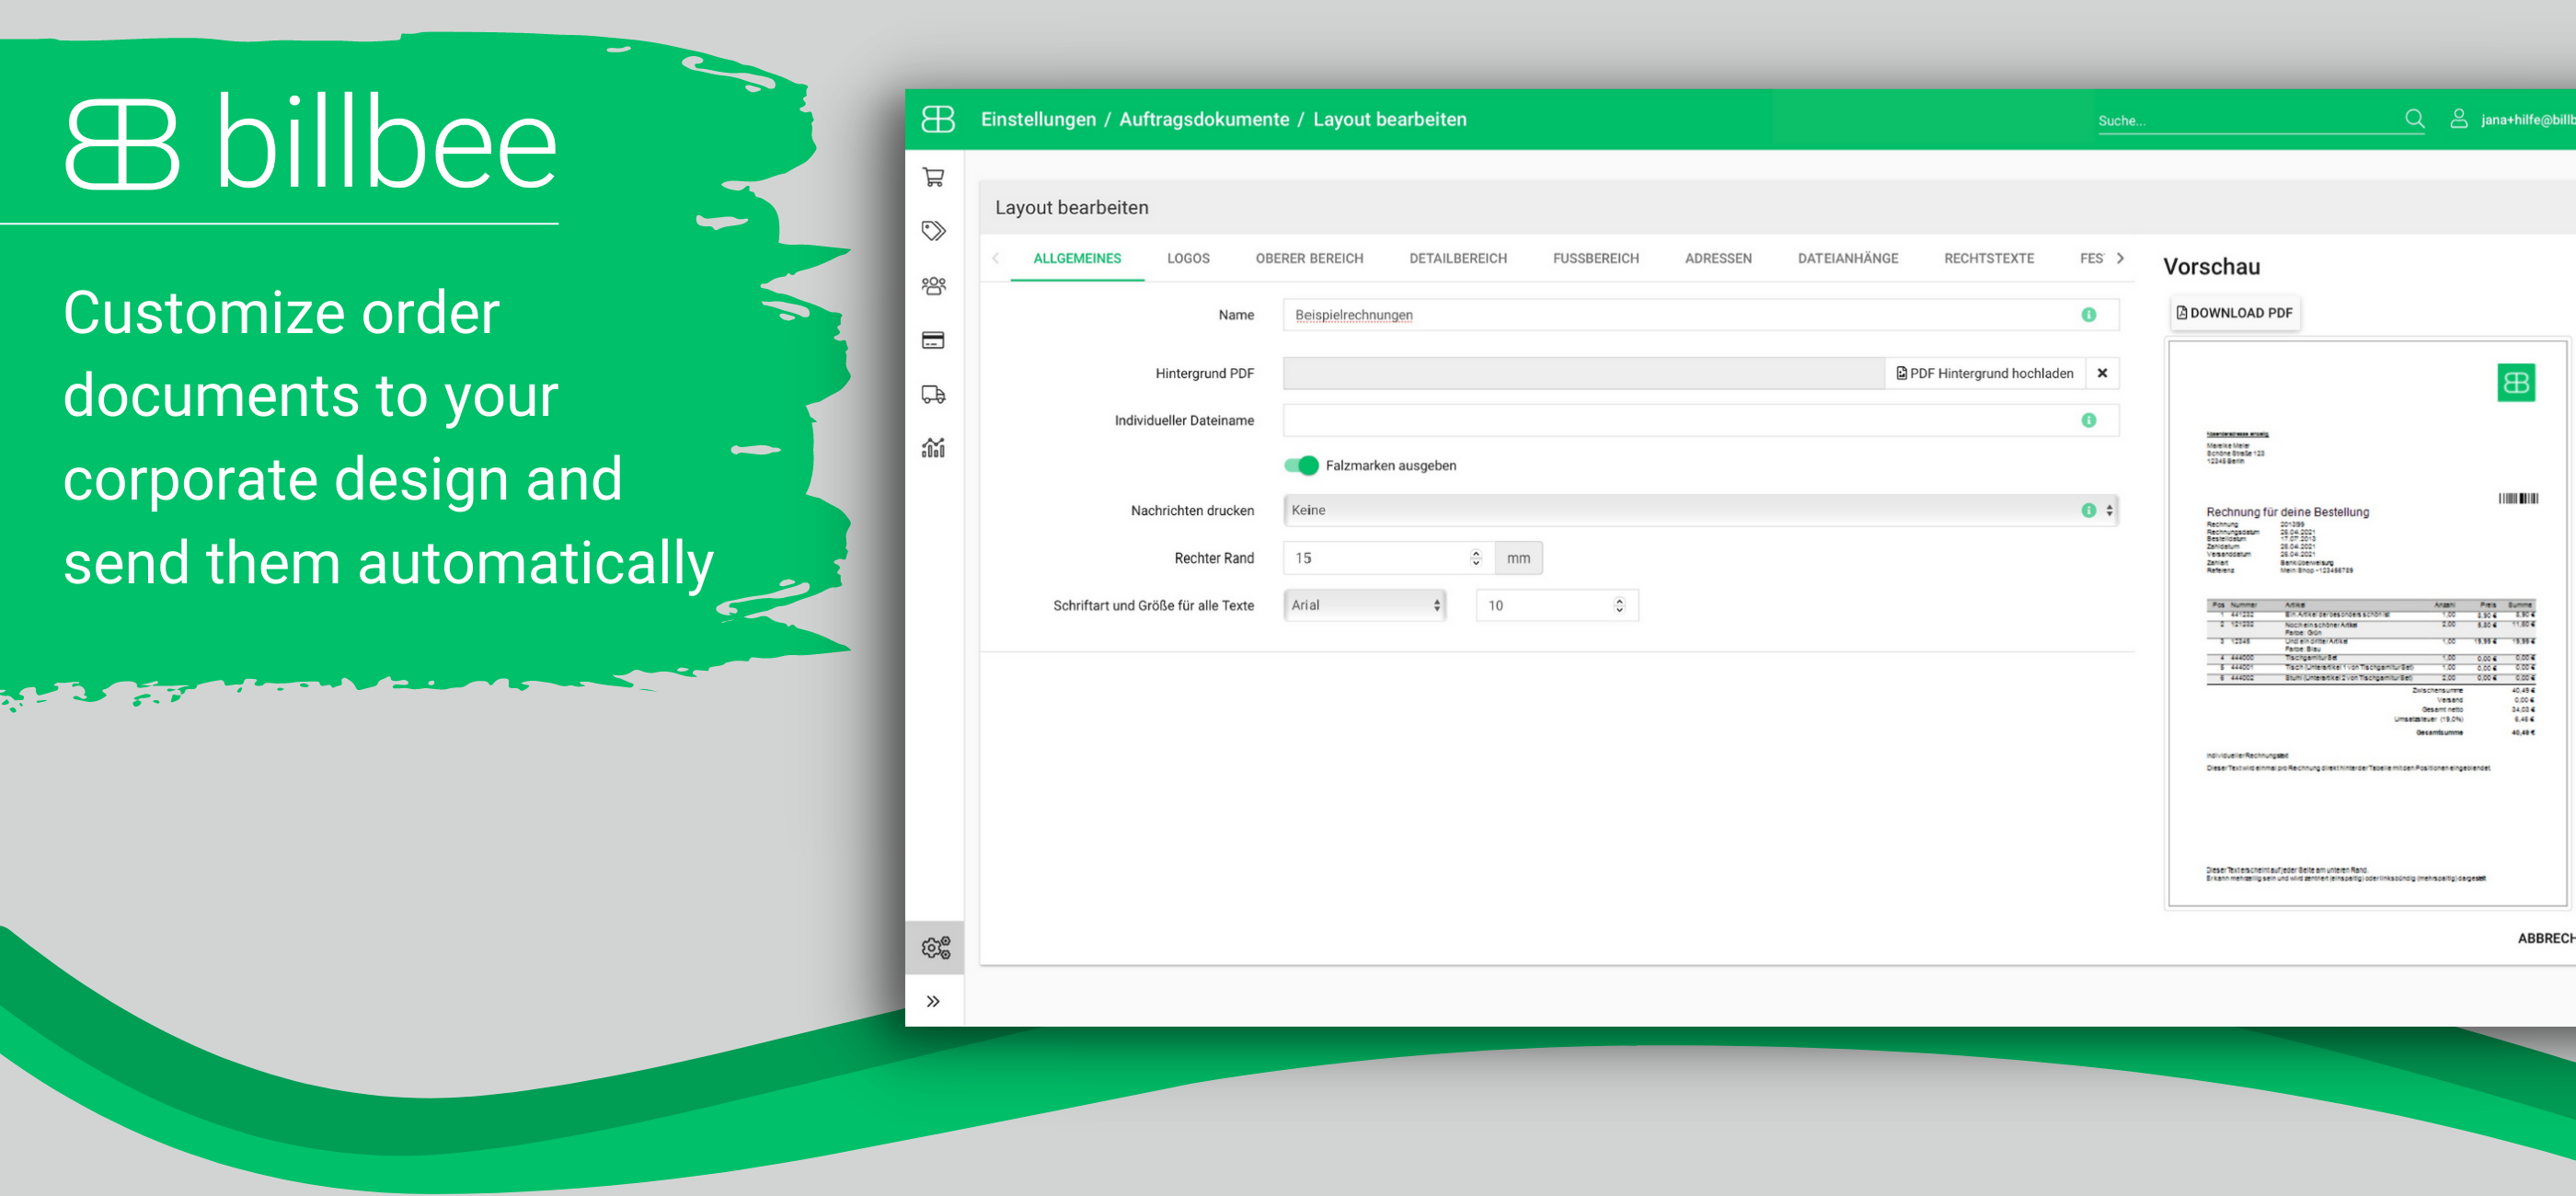 Customize order documents to your corporate design and send them automatically